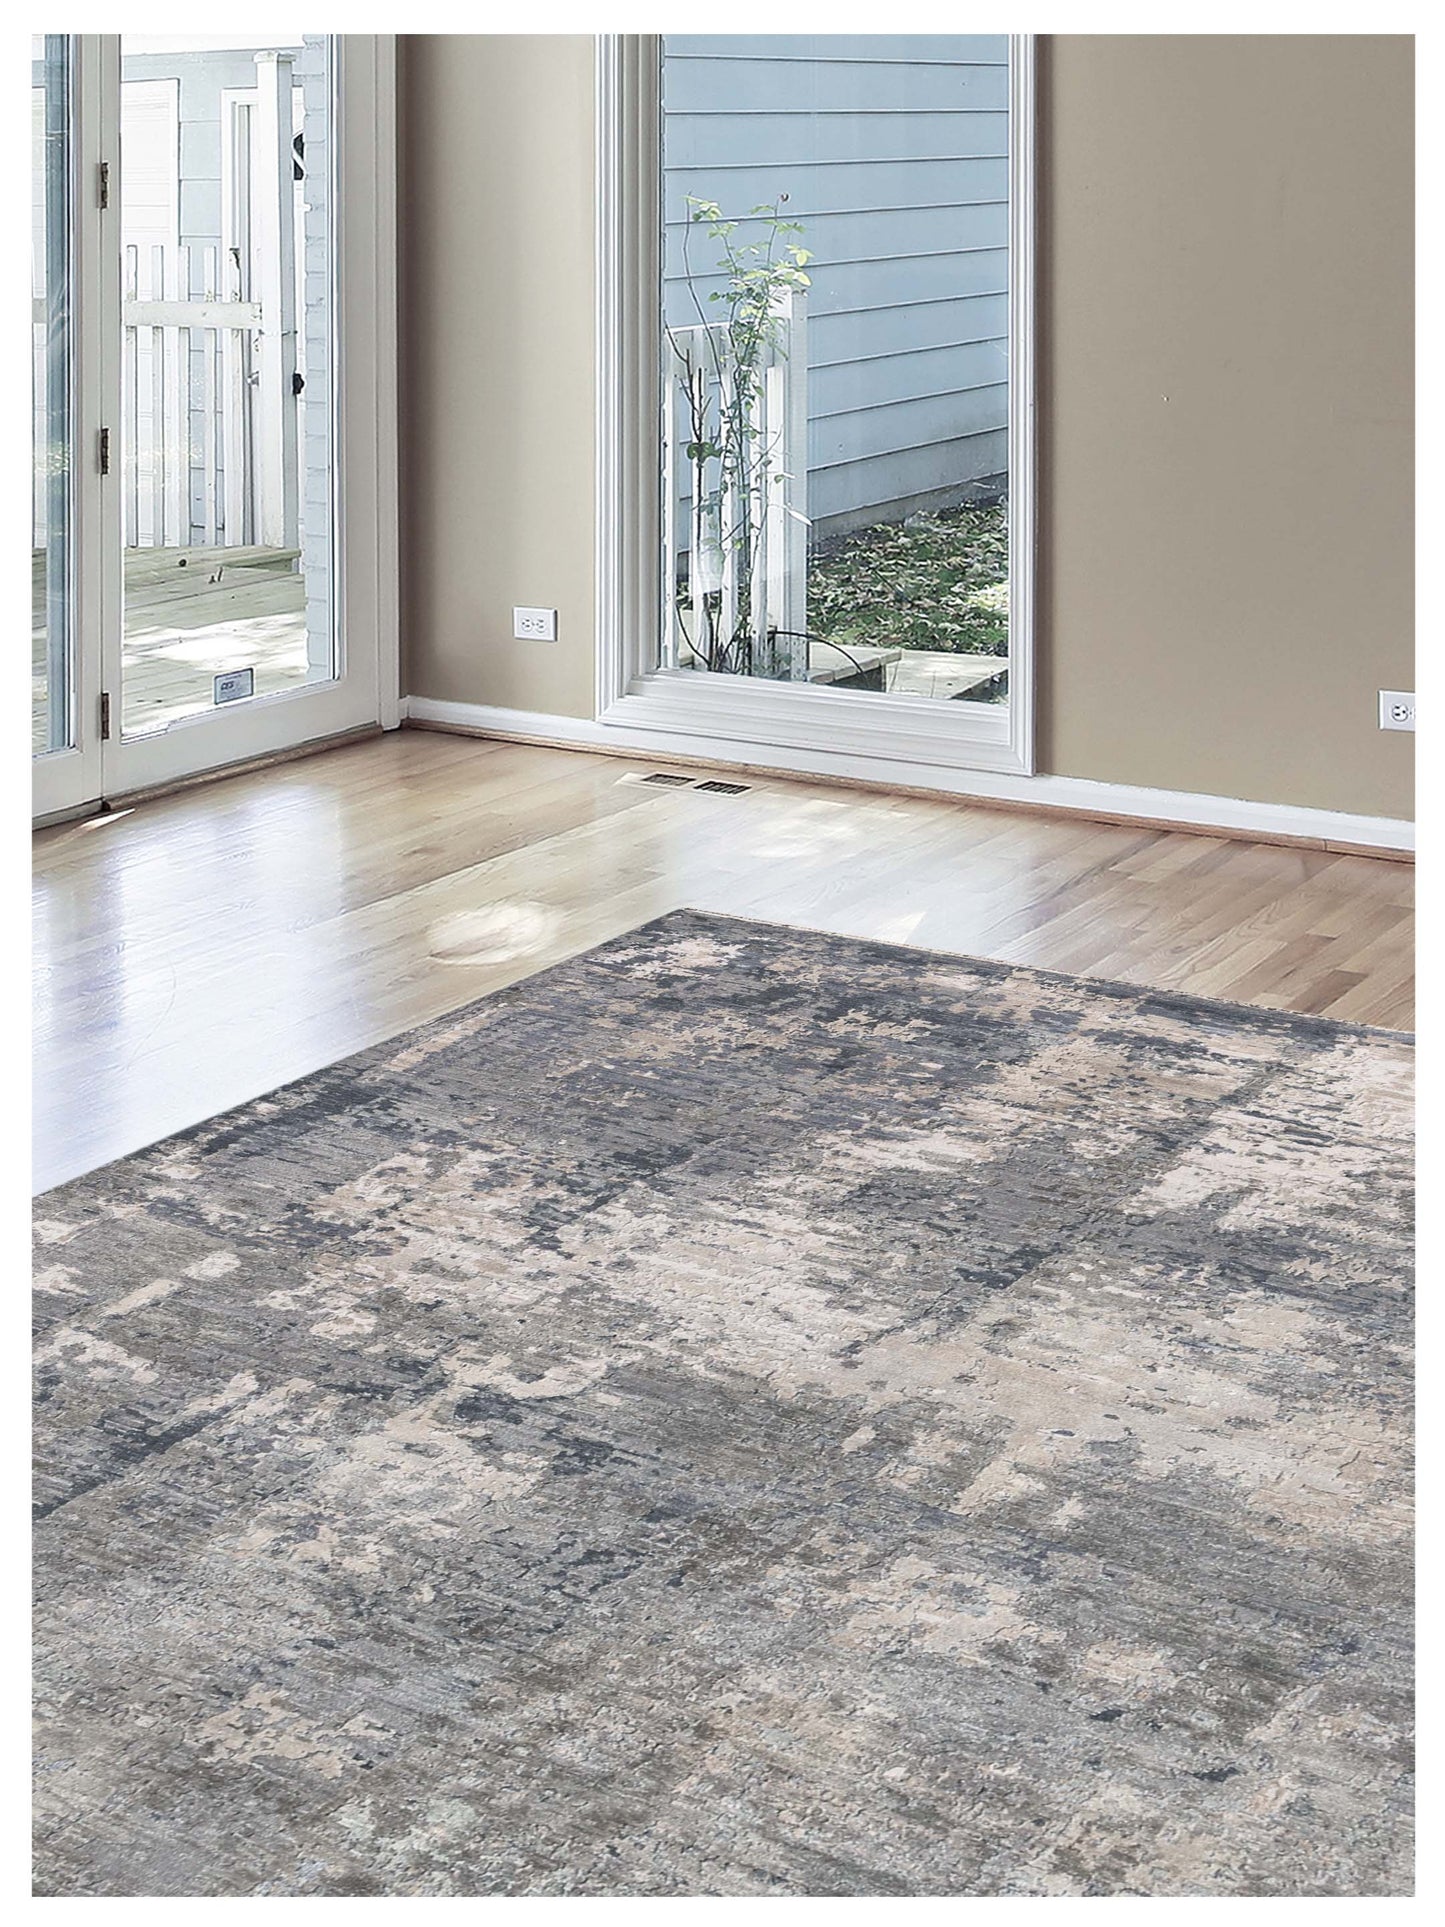 Limited Zelma WI-441 SILVER  Transitional Knotted Rug